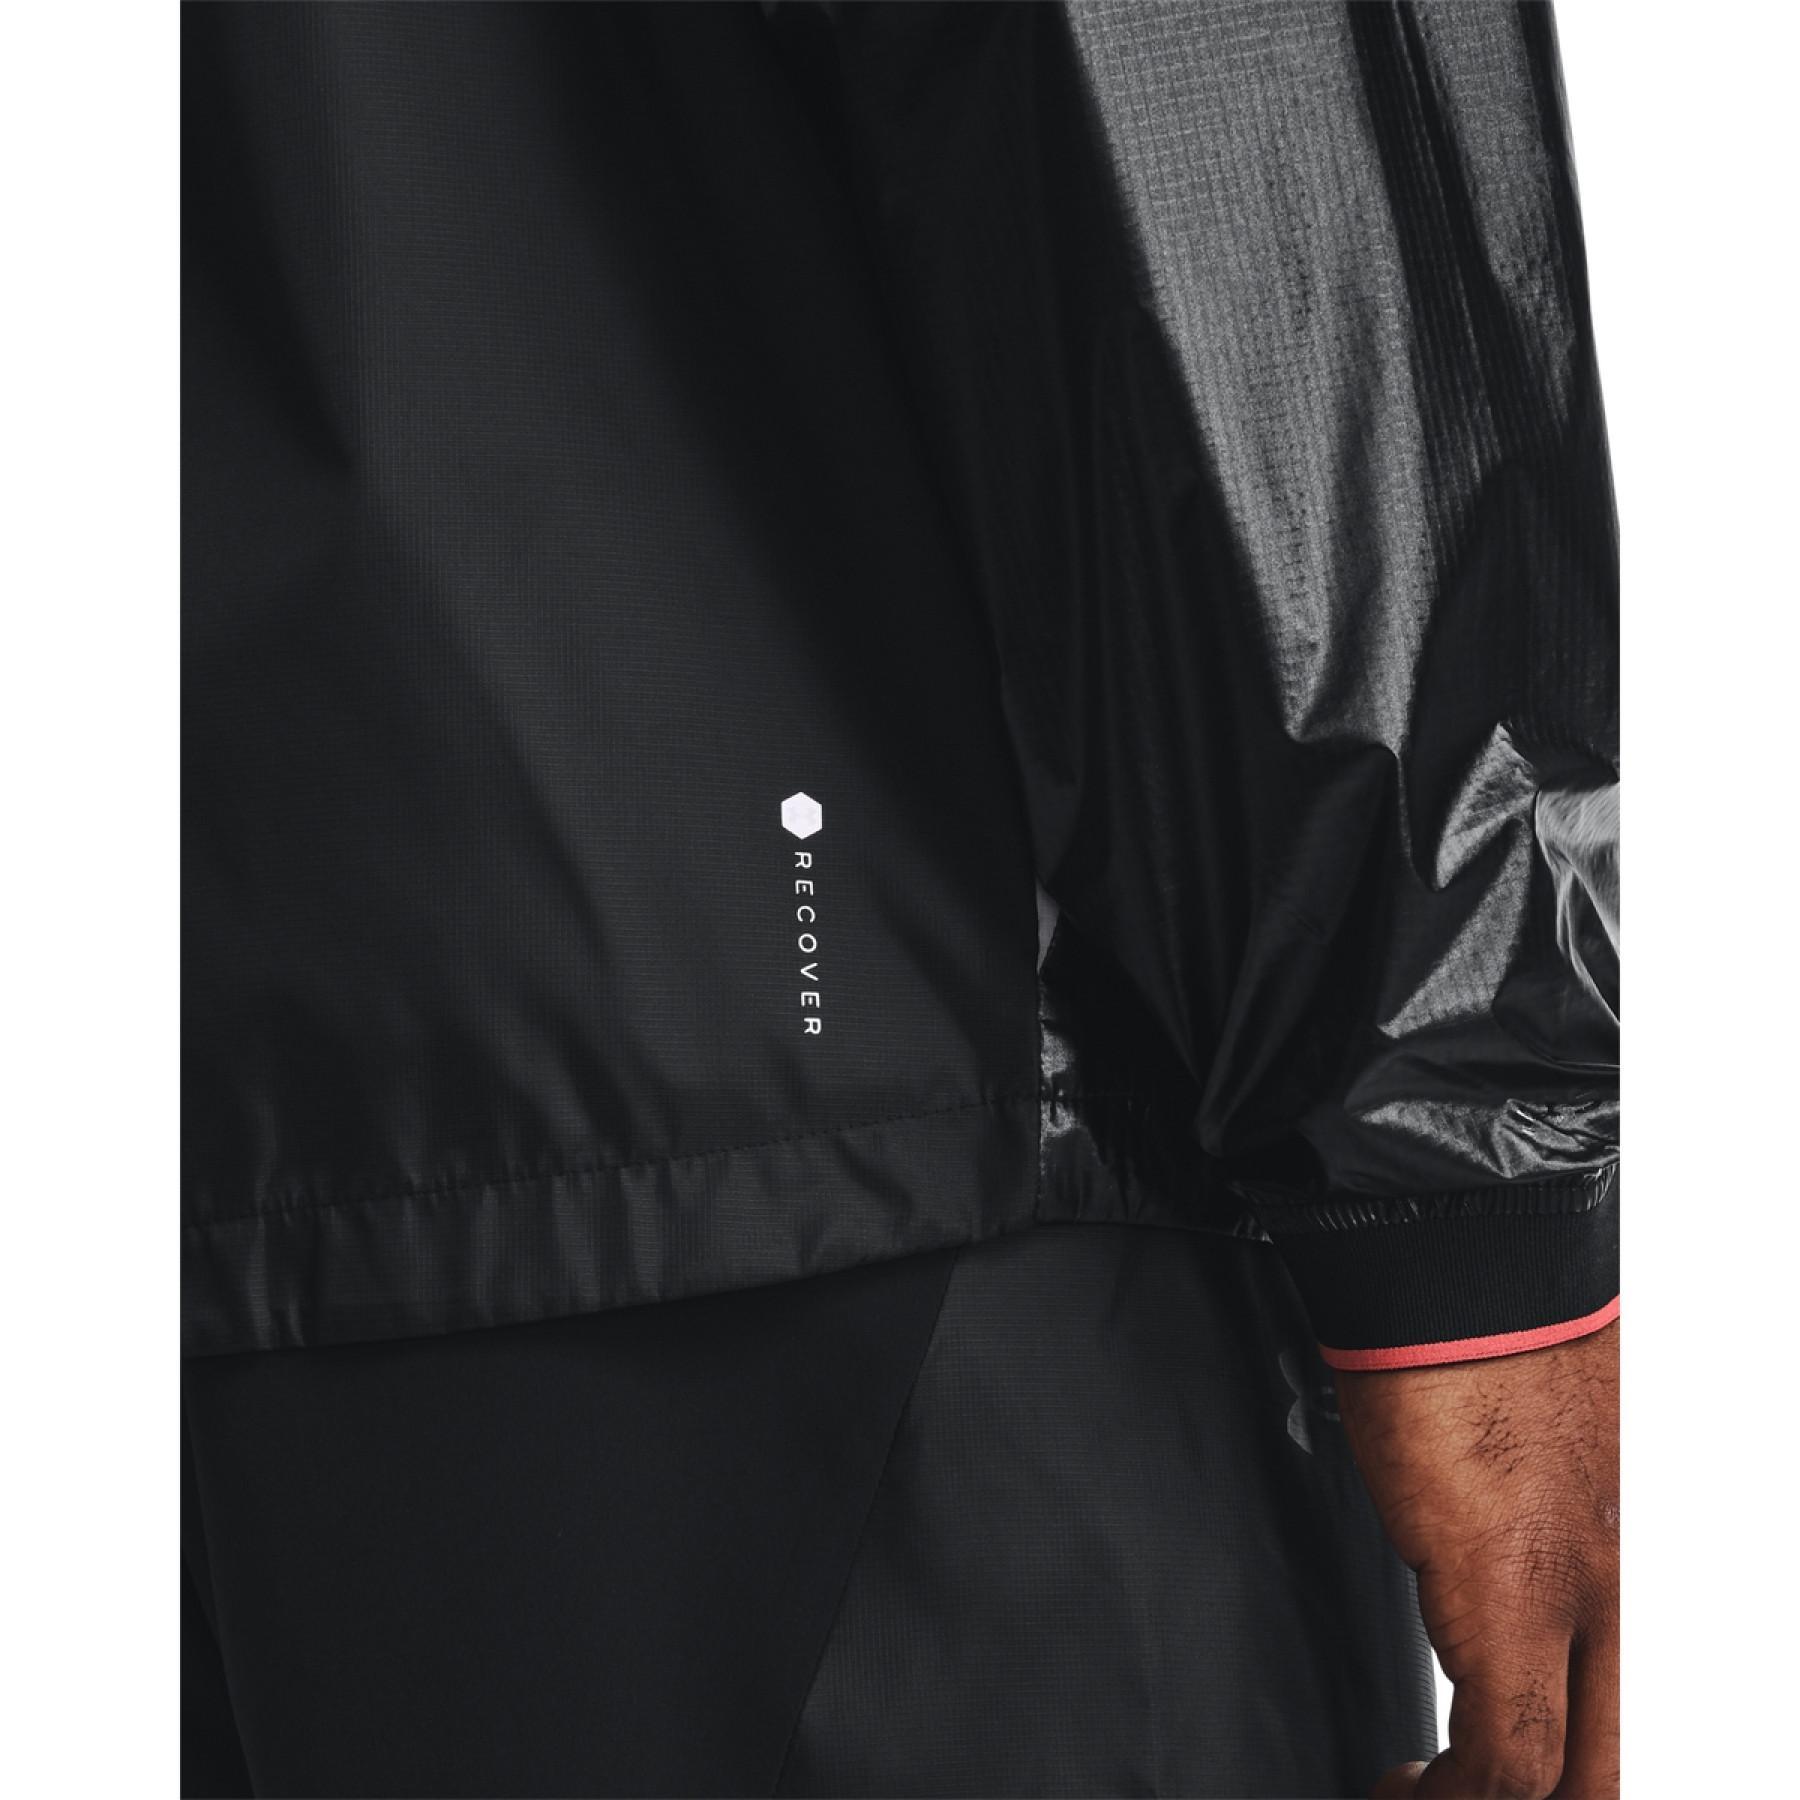 Veste Under Armour coupe-vent recoverLegacy